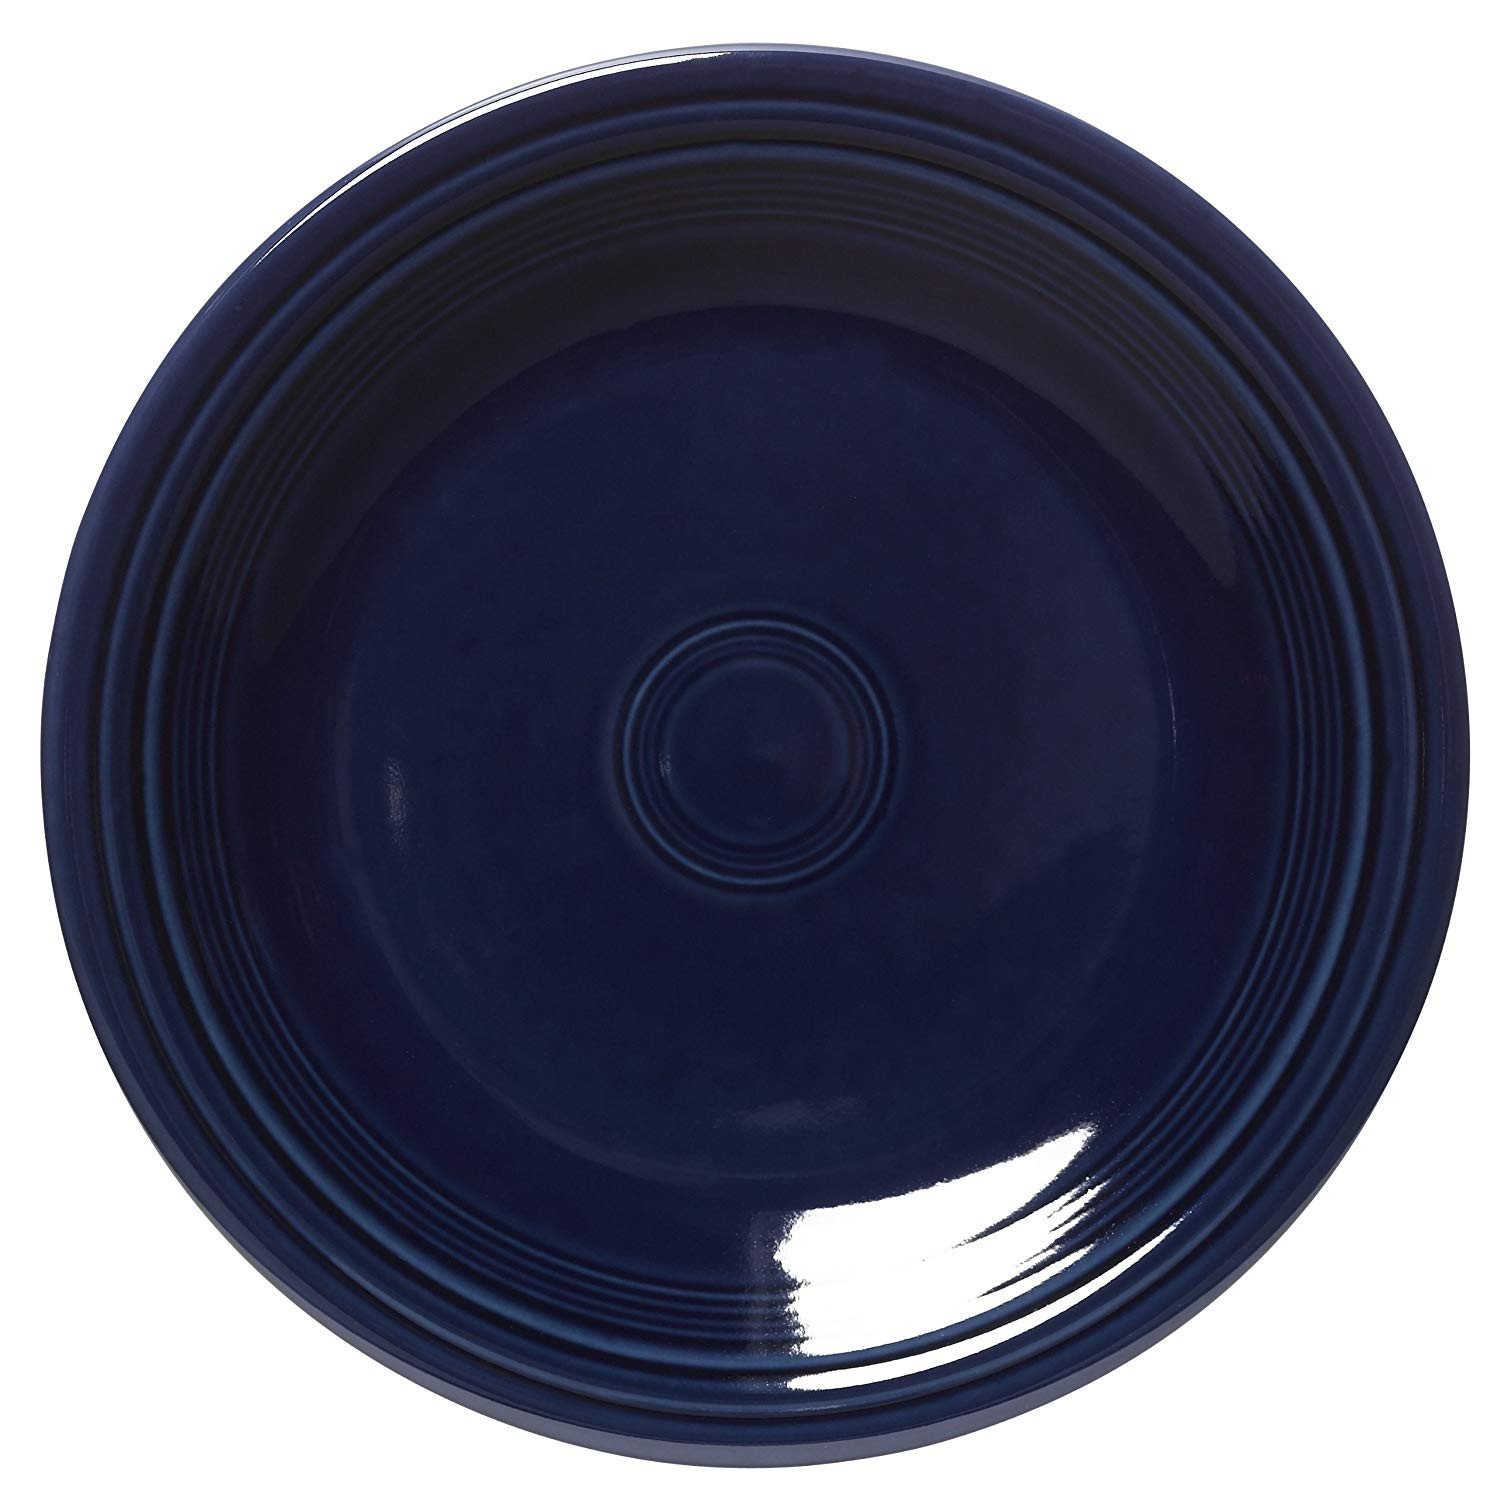 23 Famous Fiestaware Vase Prices 2024 free download fiestaware vase prices of amazon com fiesta 10 1 2 inch dinner plate cobalt fiestaware with amazon com fiesta 10 1 2 inch dinner plate cobalt fiestaware cobalt dinner plates